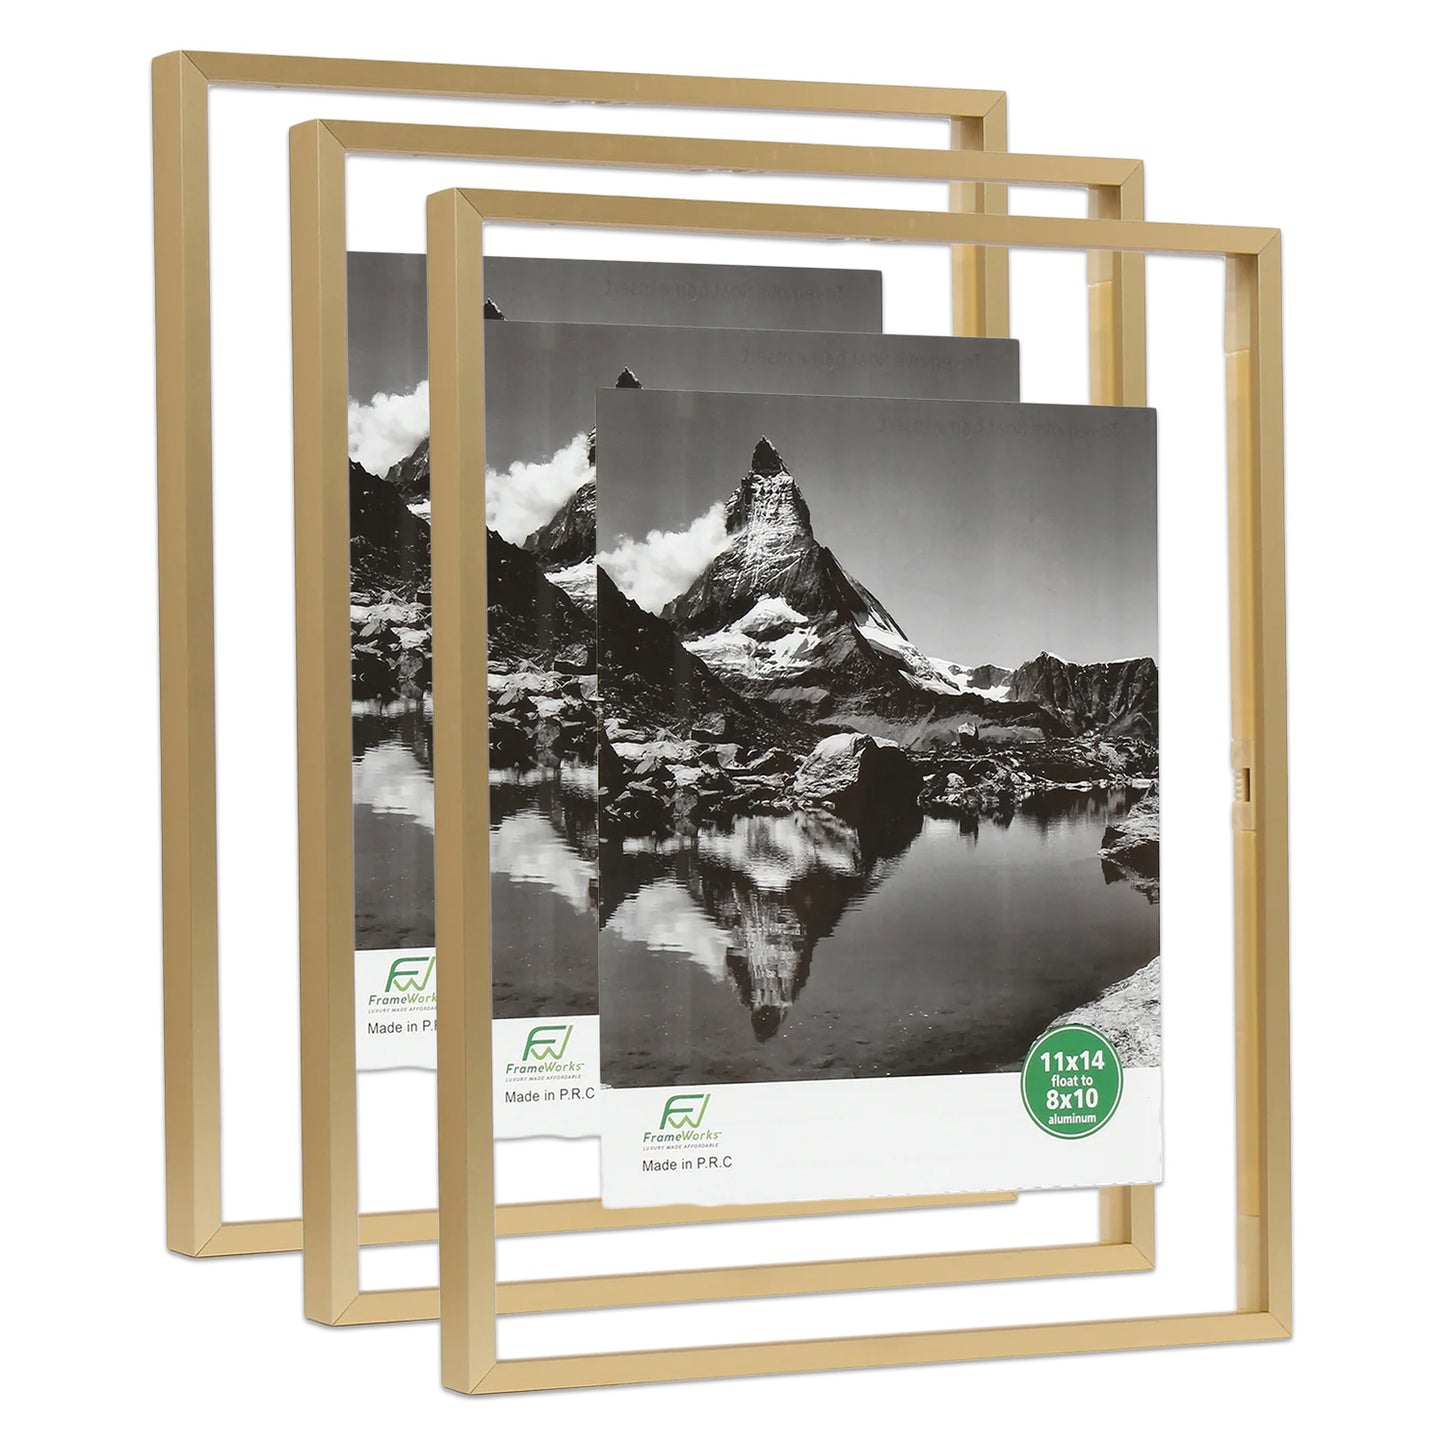 11" x 14" Deluxe Brass Gold Aluminum Contemporary Floating Picture Frame with Tempered Glass